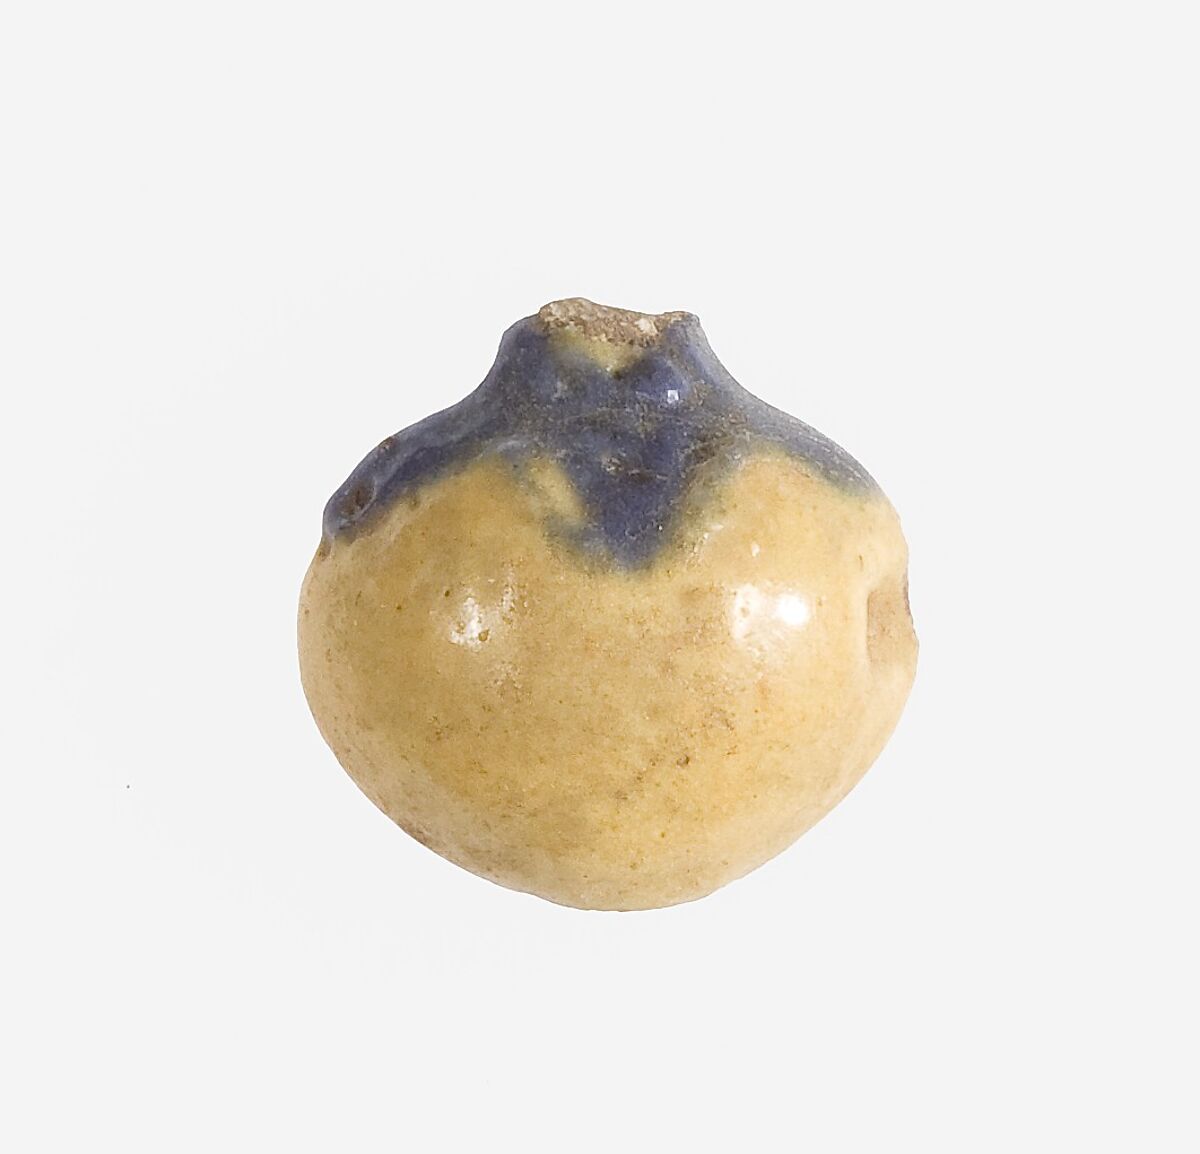 Persea fruit pendant, Faience, violet and yellow 